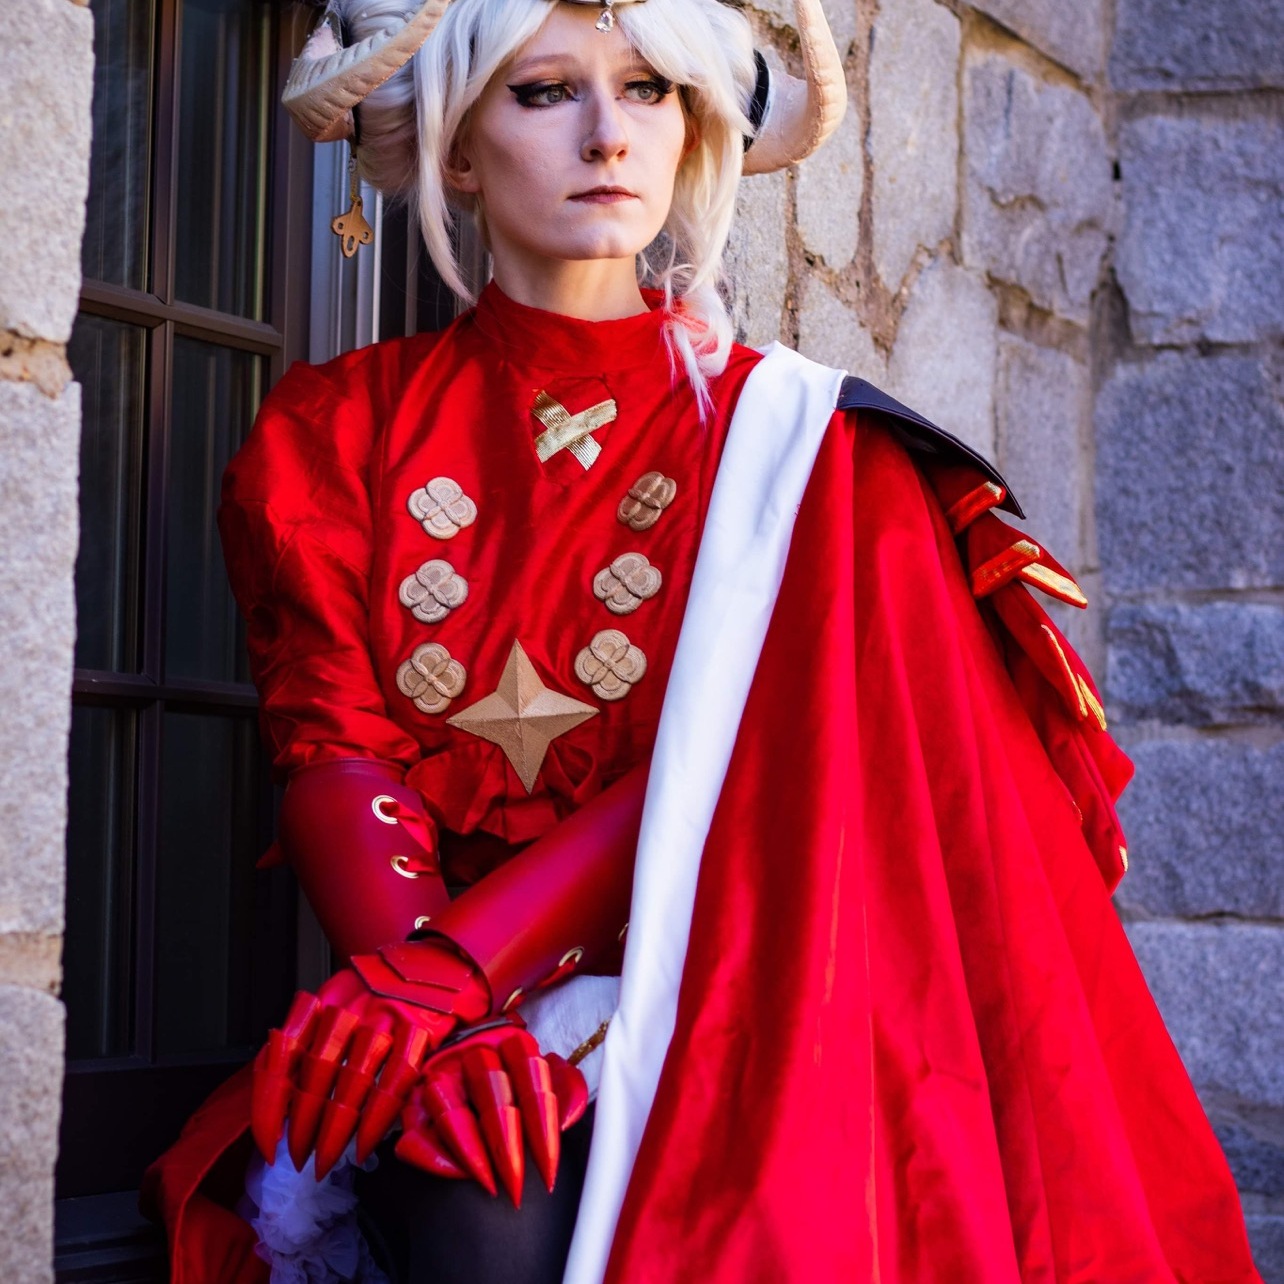 Woman with horns in a red cape and tunic in front of an old building.